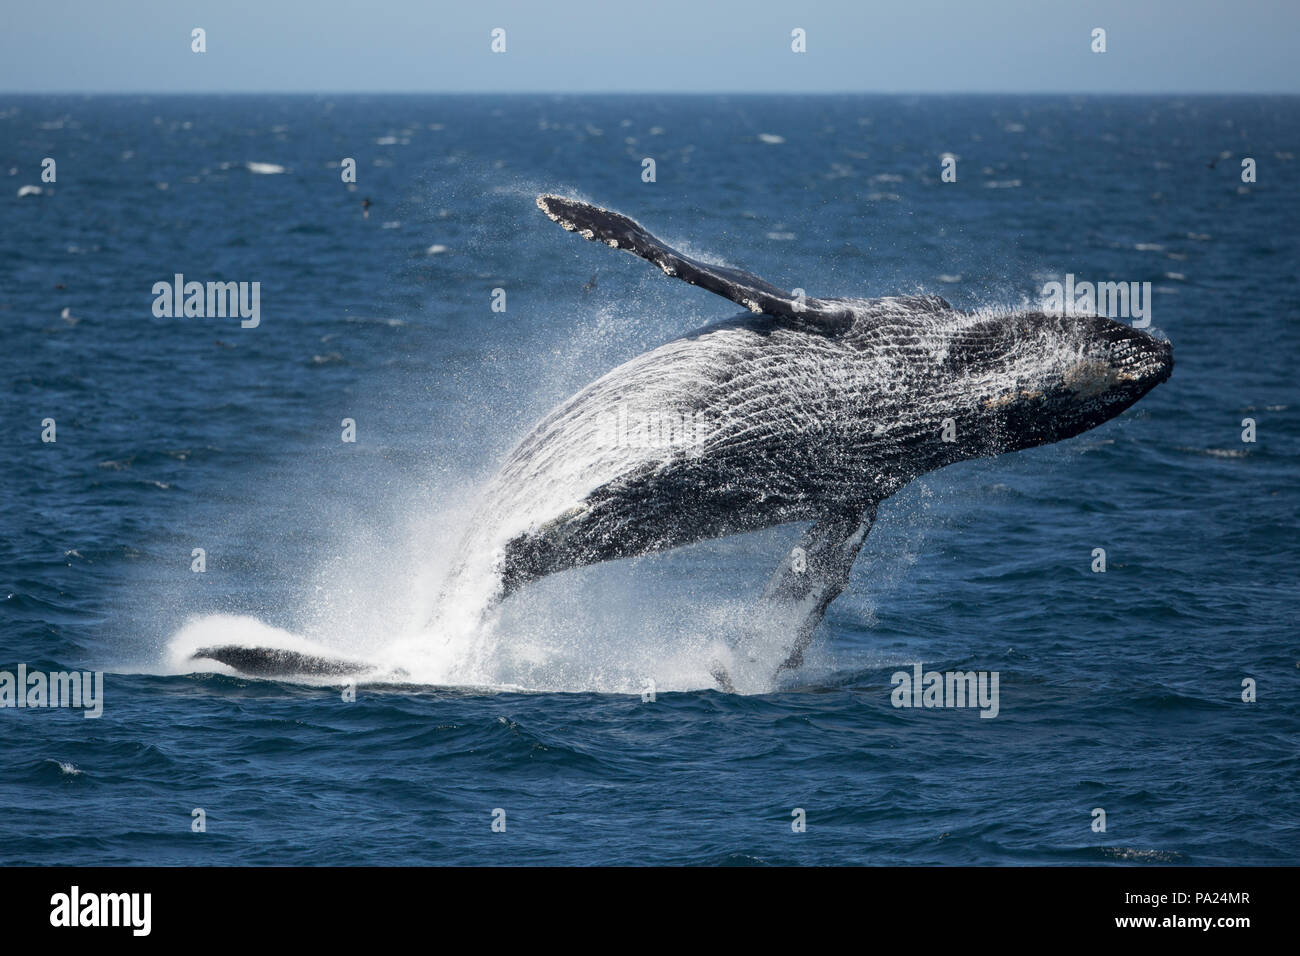 Breaching Humpback Whale, North Pacific Stock Photo